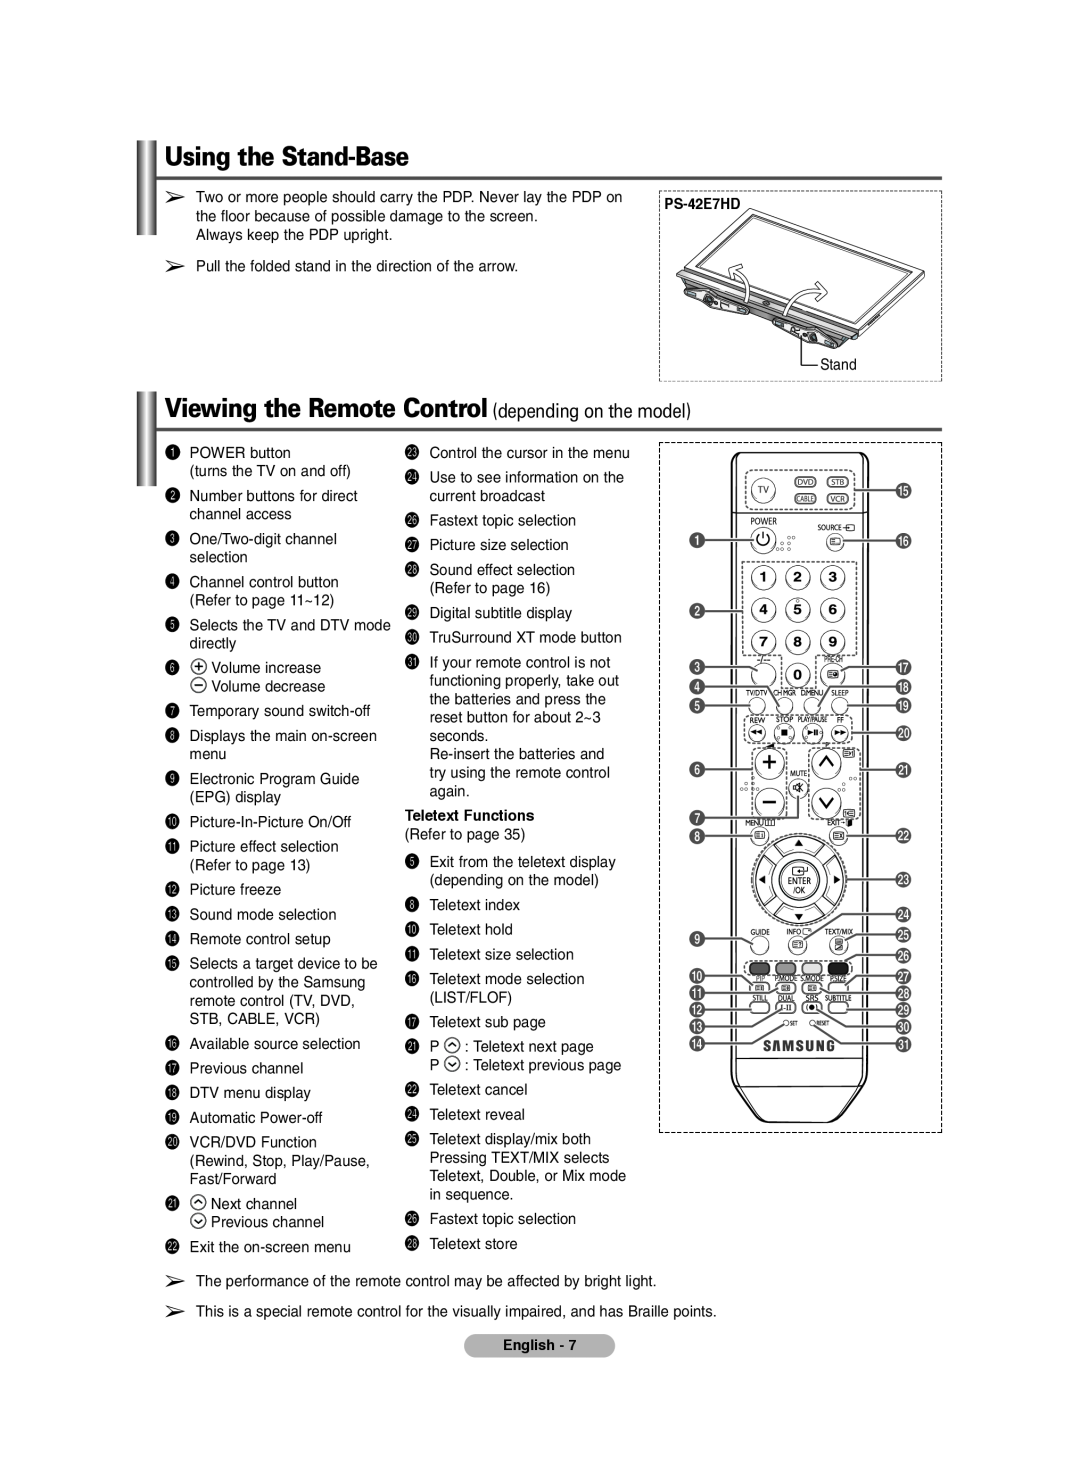 Samsung PS-42E7HD, PS-42E71HD manual Using the Stand-Base, Viewing the Remote Control depending on the model 